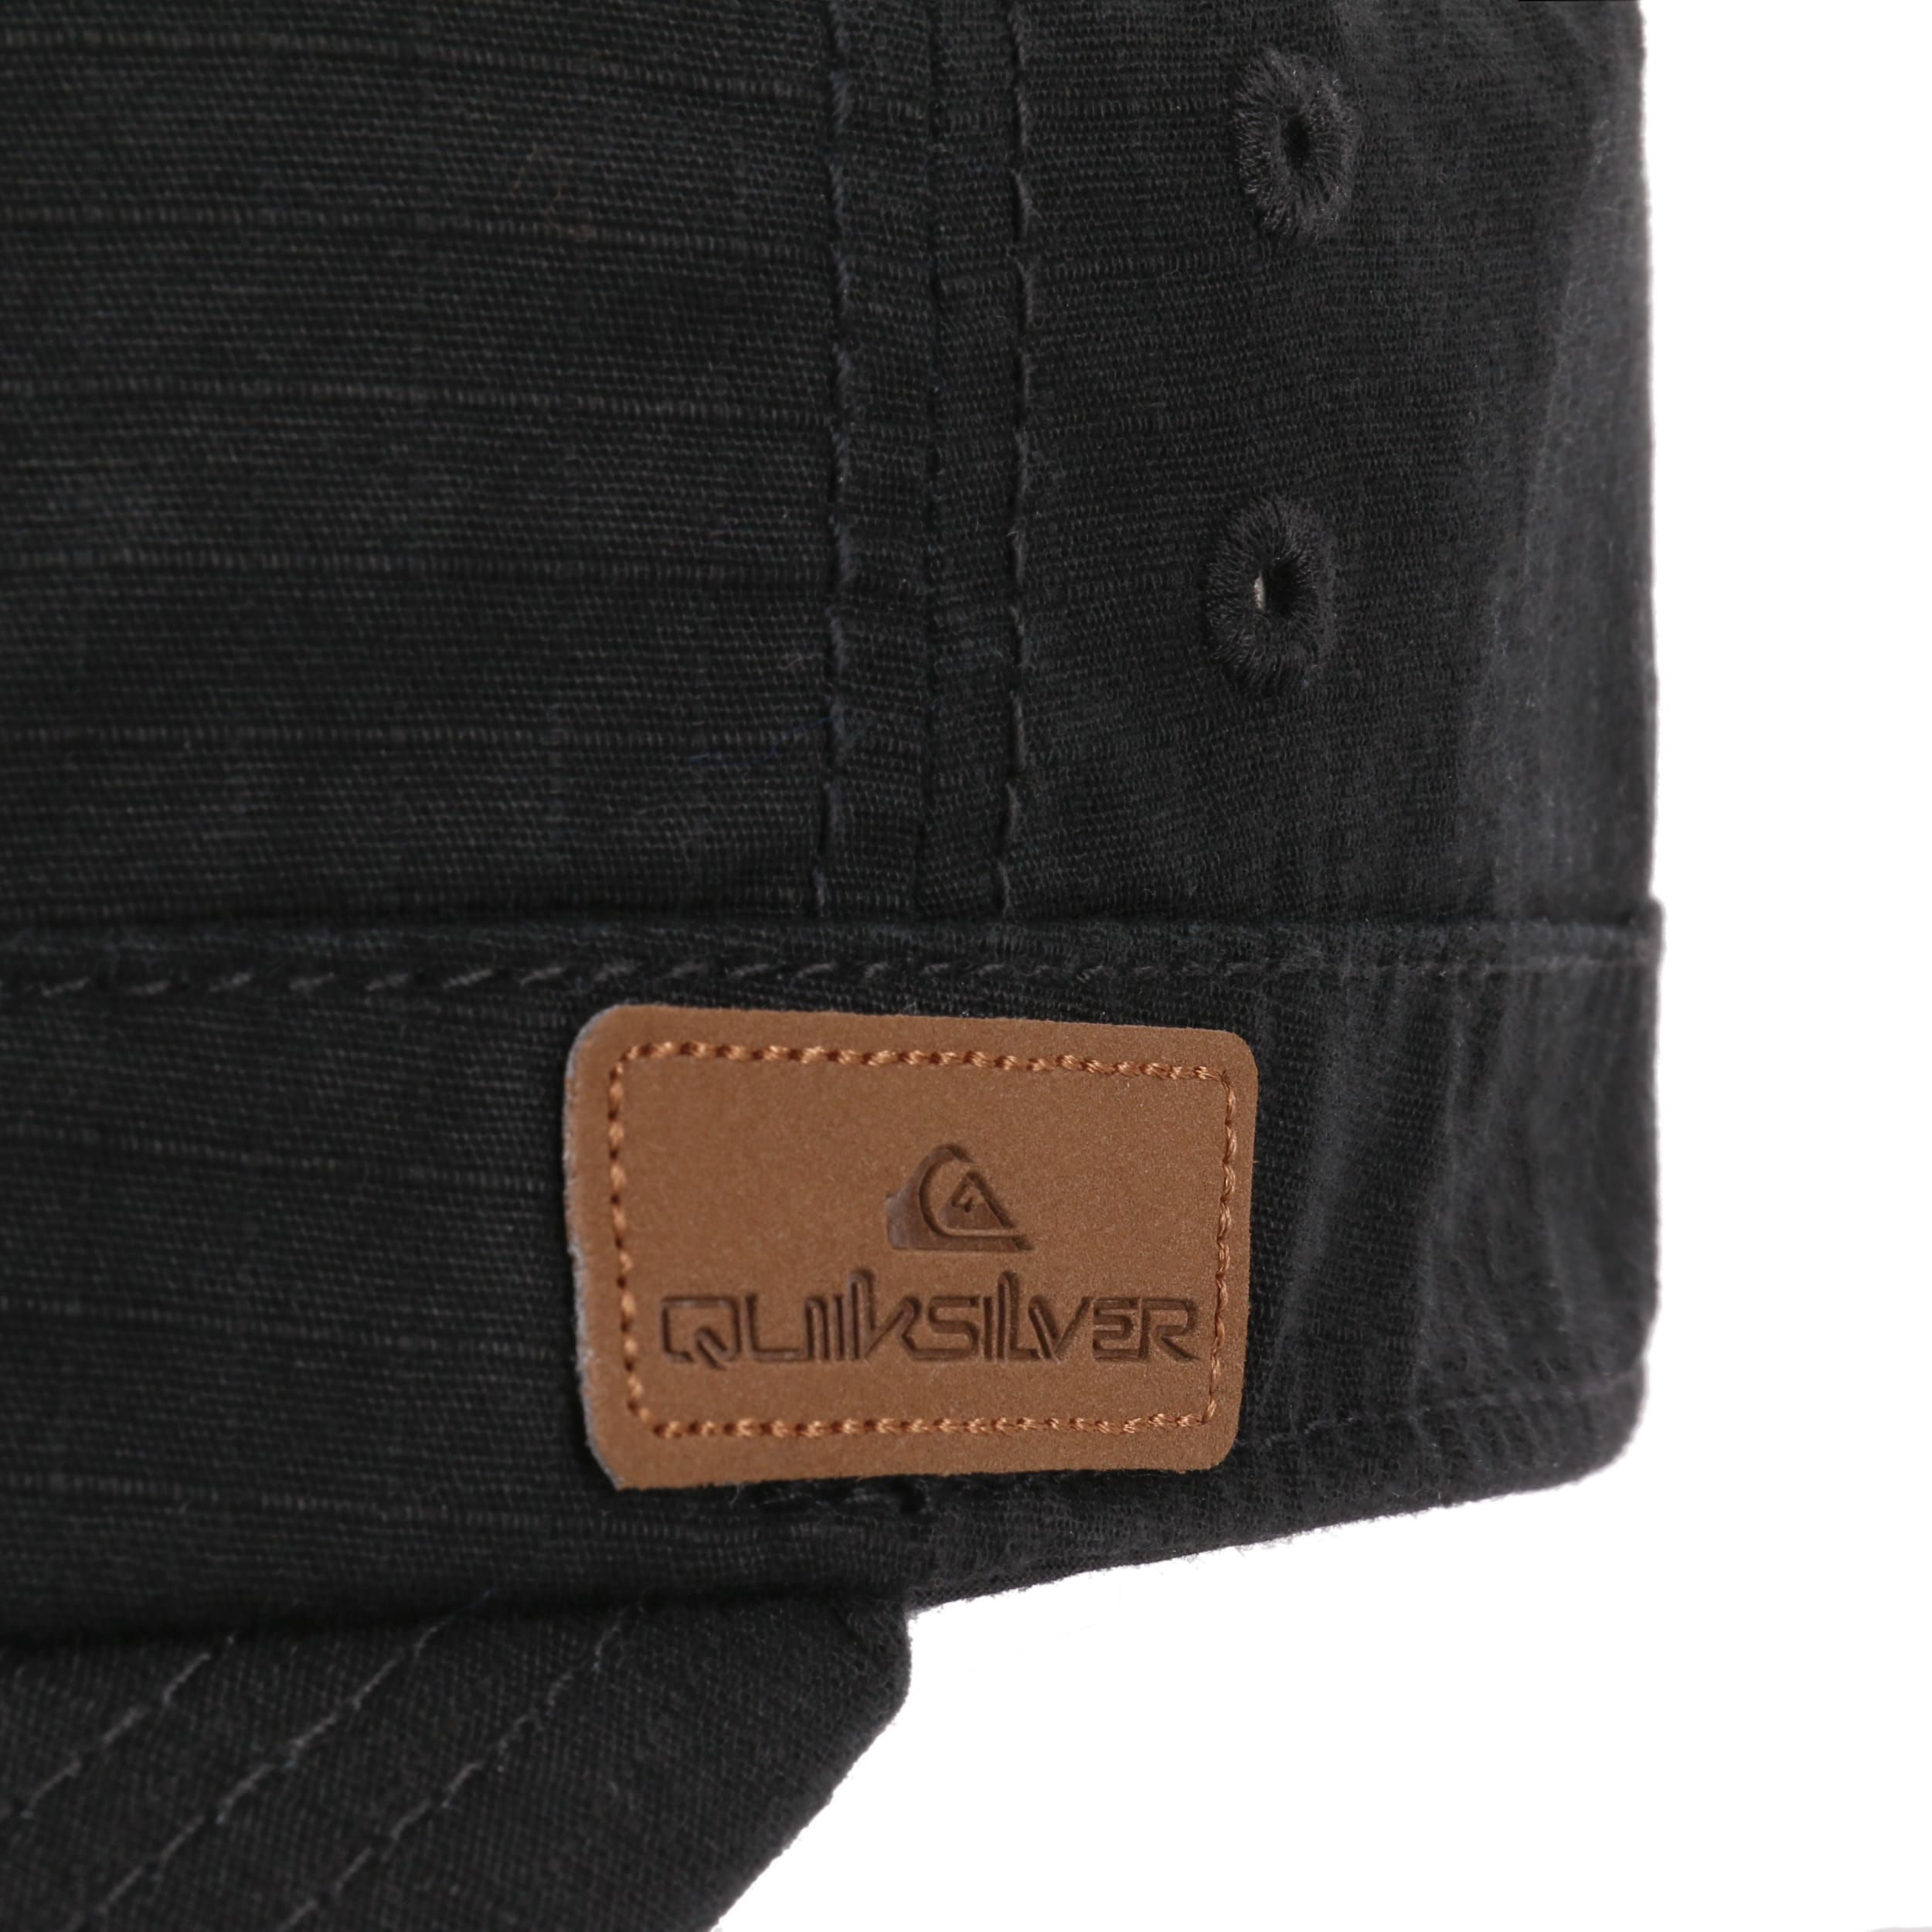 Renegade 2 Army Cap by Quiksilver - 32,95 €